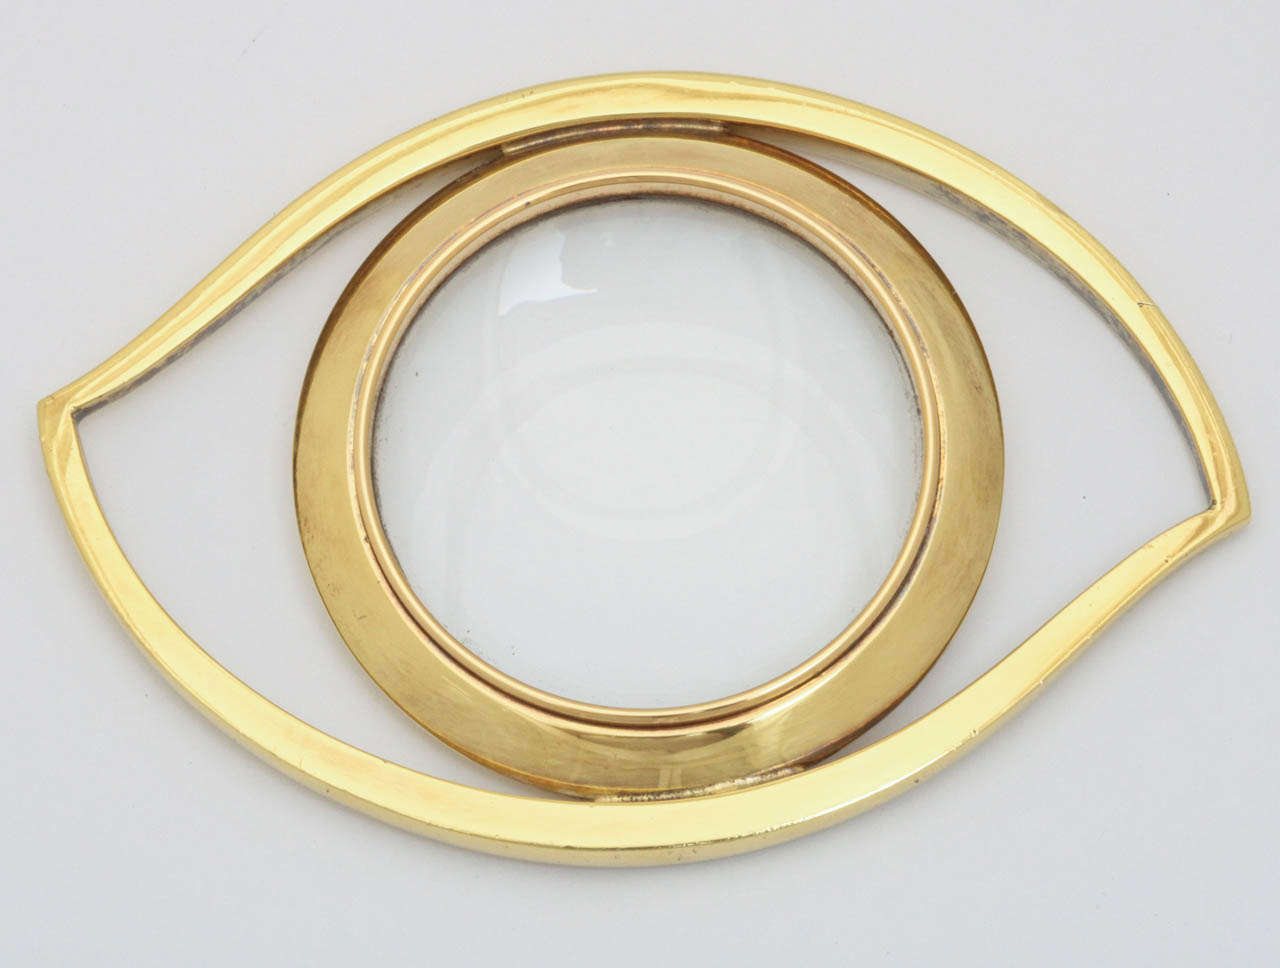 A gold plated magnifying glass in the shape of an eye by Hermes Paris. Marked Hermes Paris. Nice older example in the original Hermes box. Excellent condition.